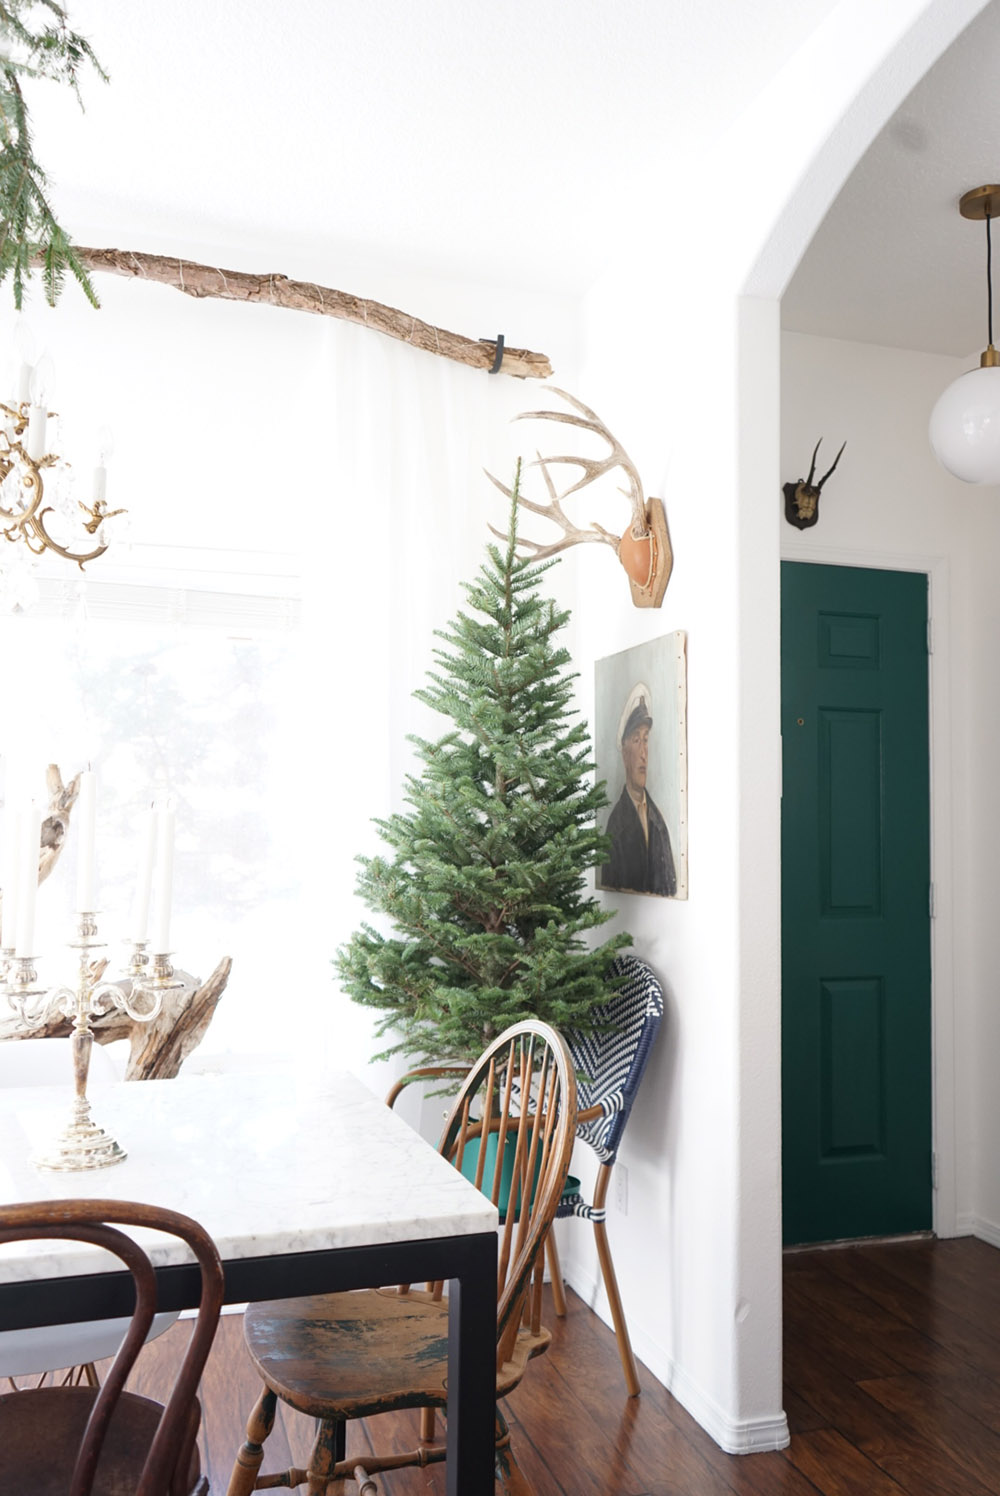 A small undecorated Christmas tree sits in a chair behind a dining table.